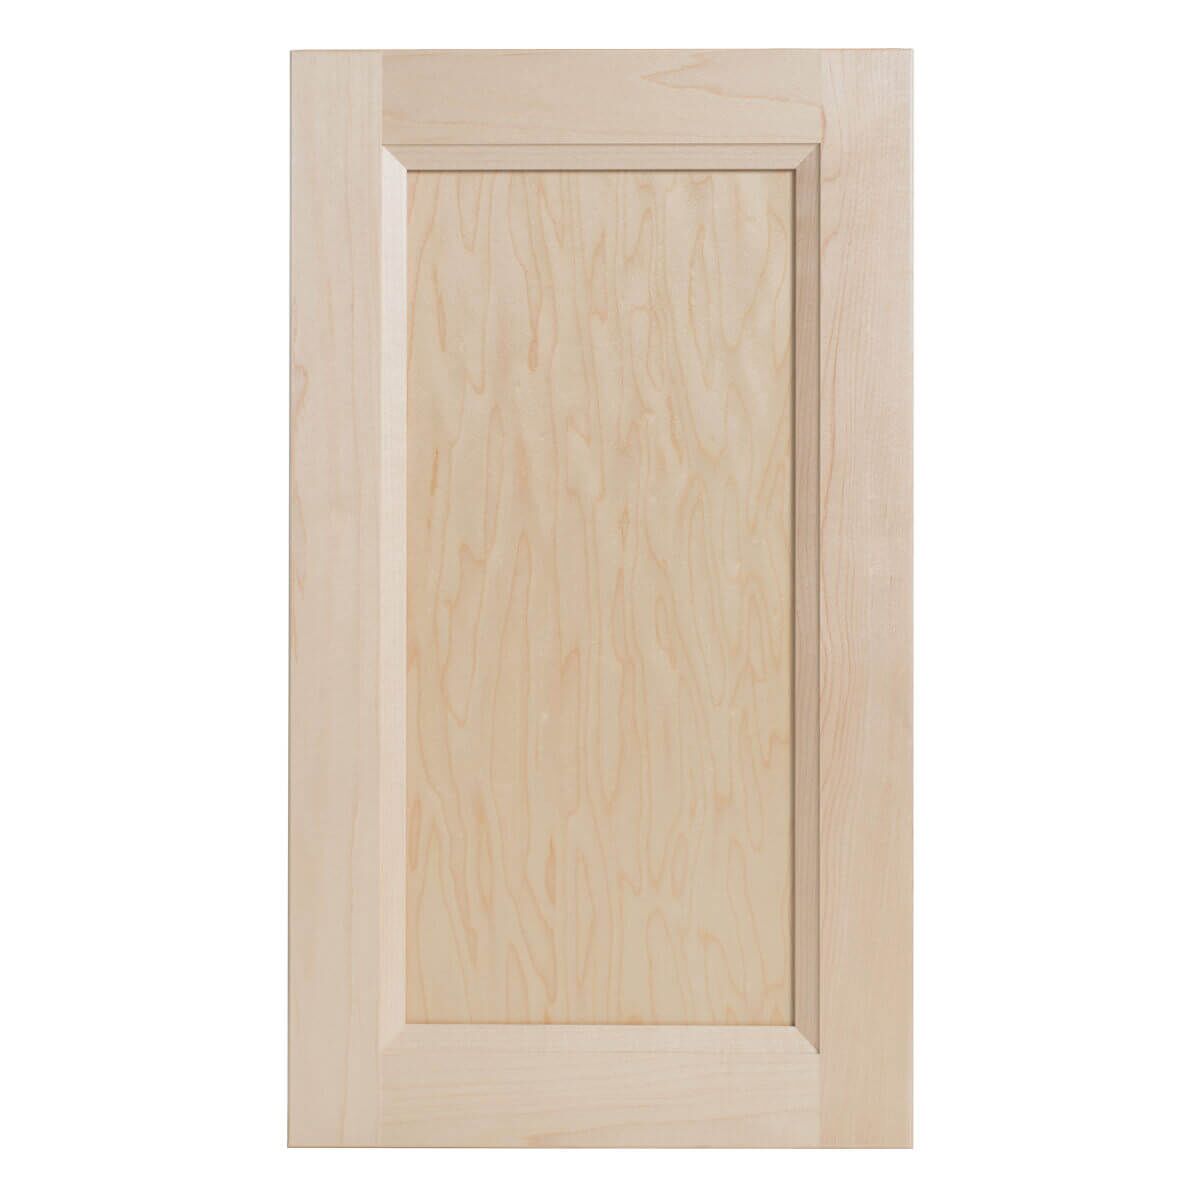 Cabinet Doors Free Shipping The